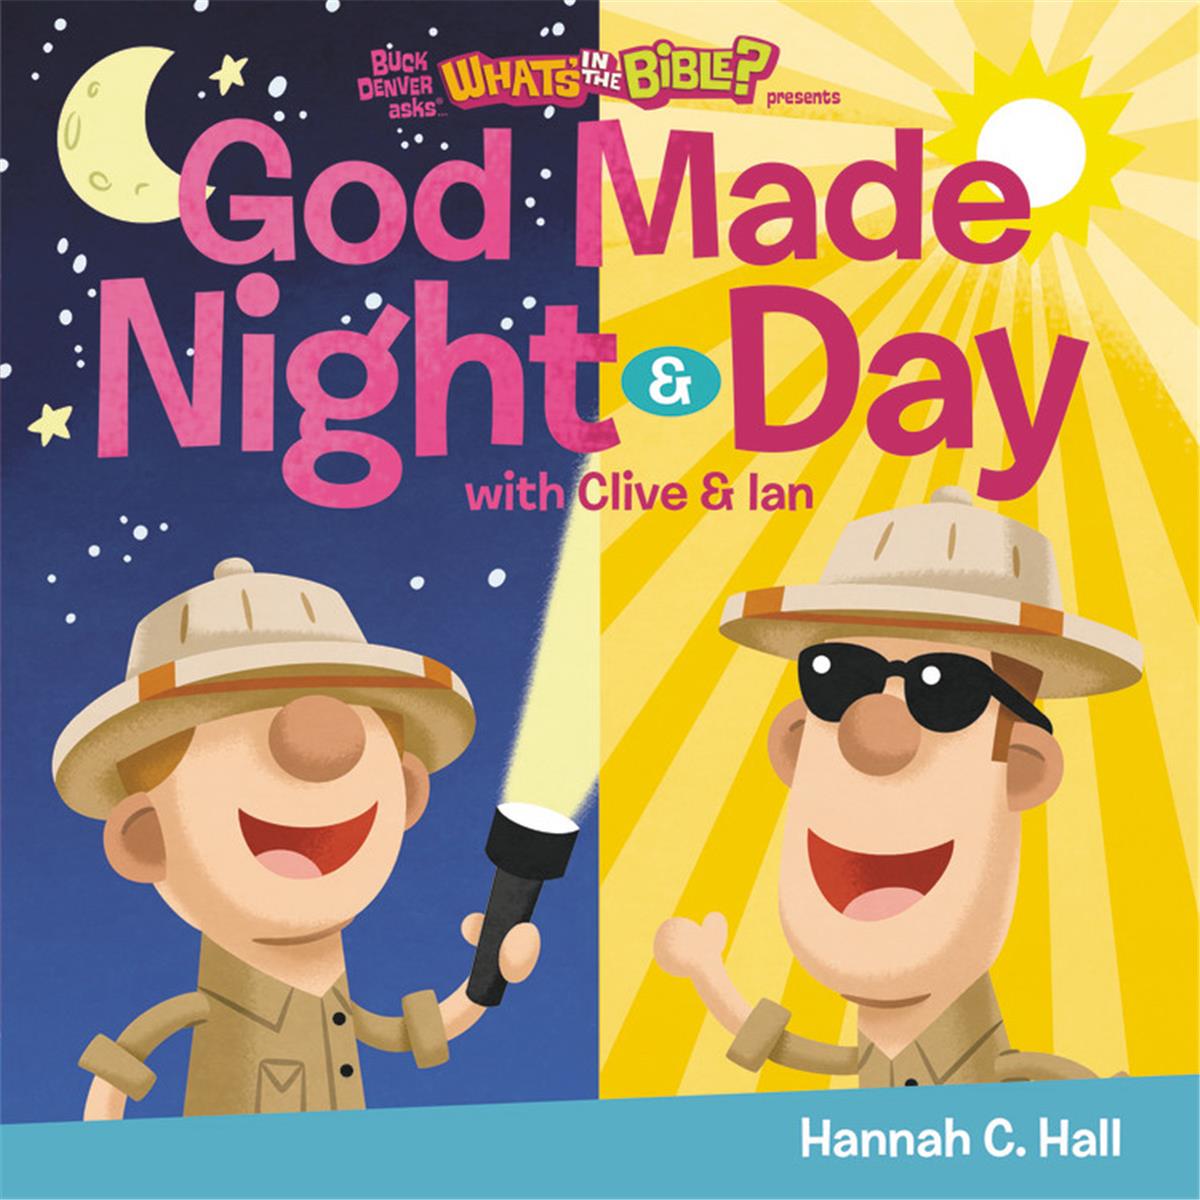 Jellytelly Press 172340 God Made Night & Day - Buck Denver Asks Whats In The Bible